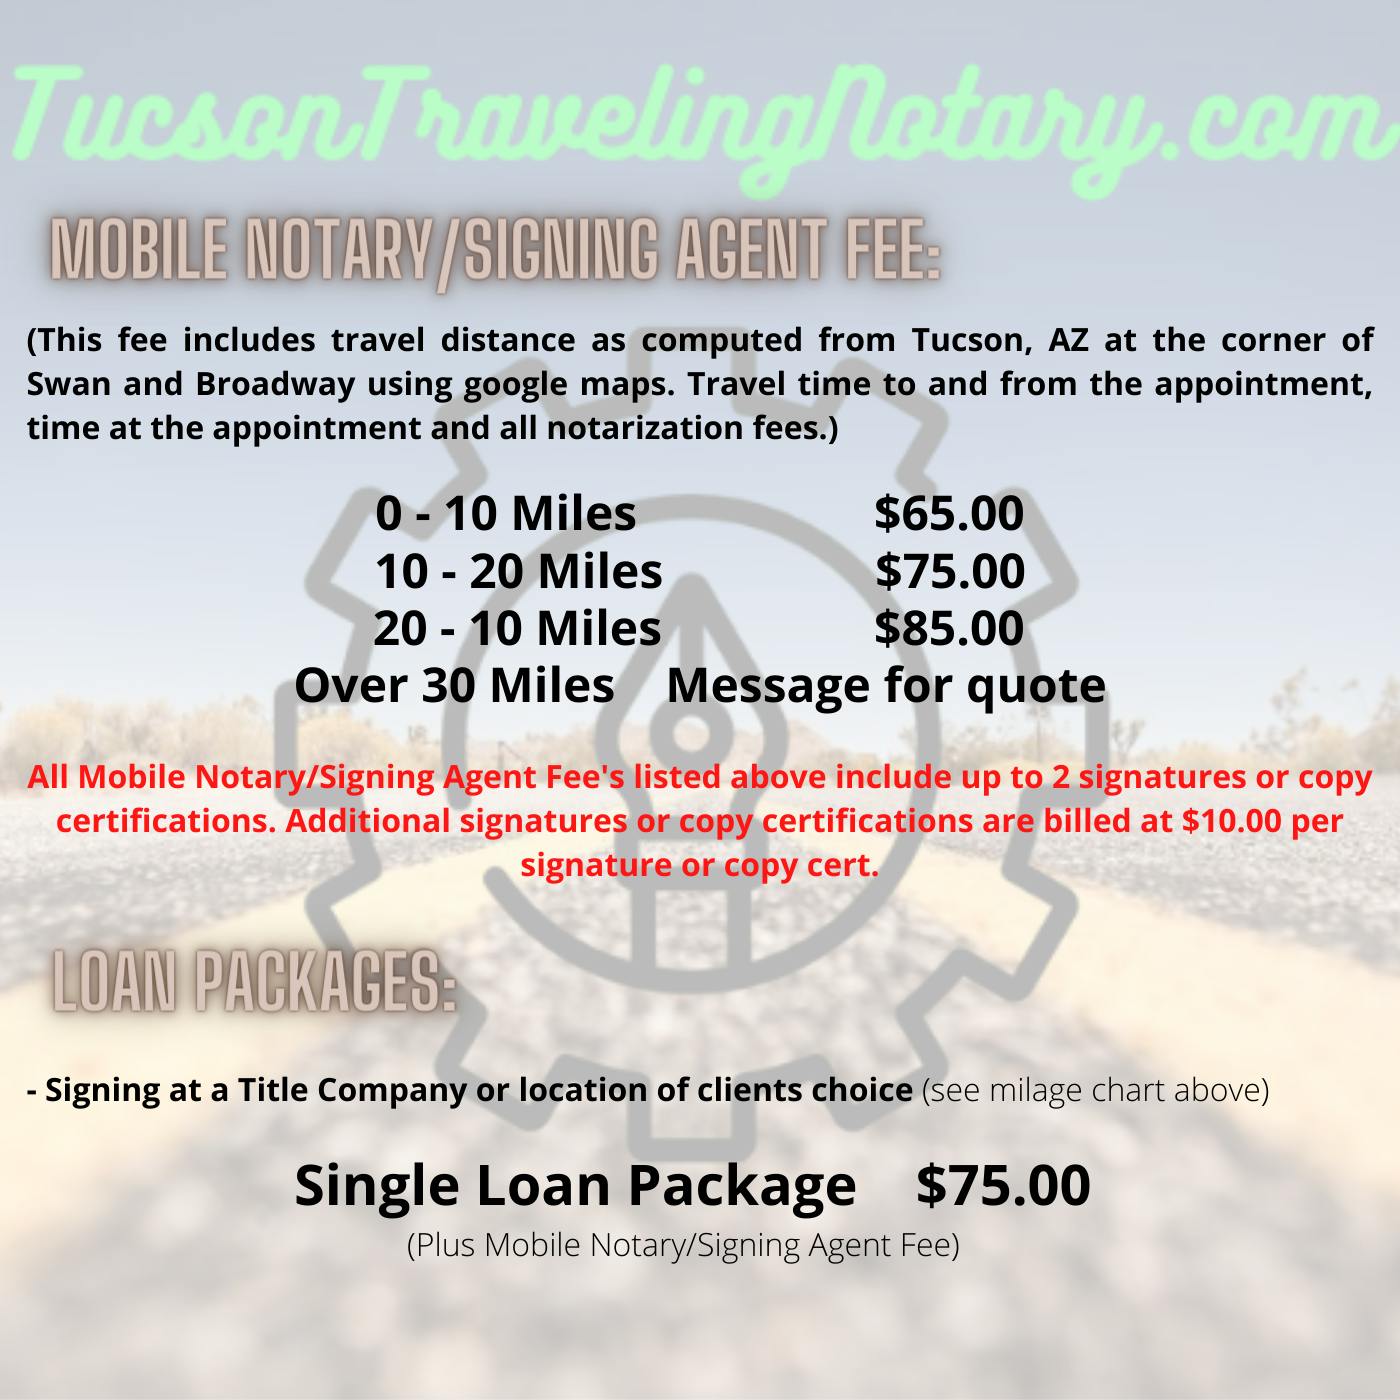 How much can a mobile notary charge in Tucson? Pricing sheet for mobile notary near me Tucson services